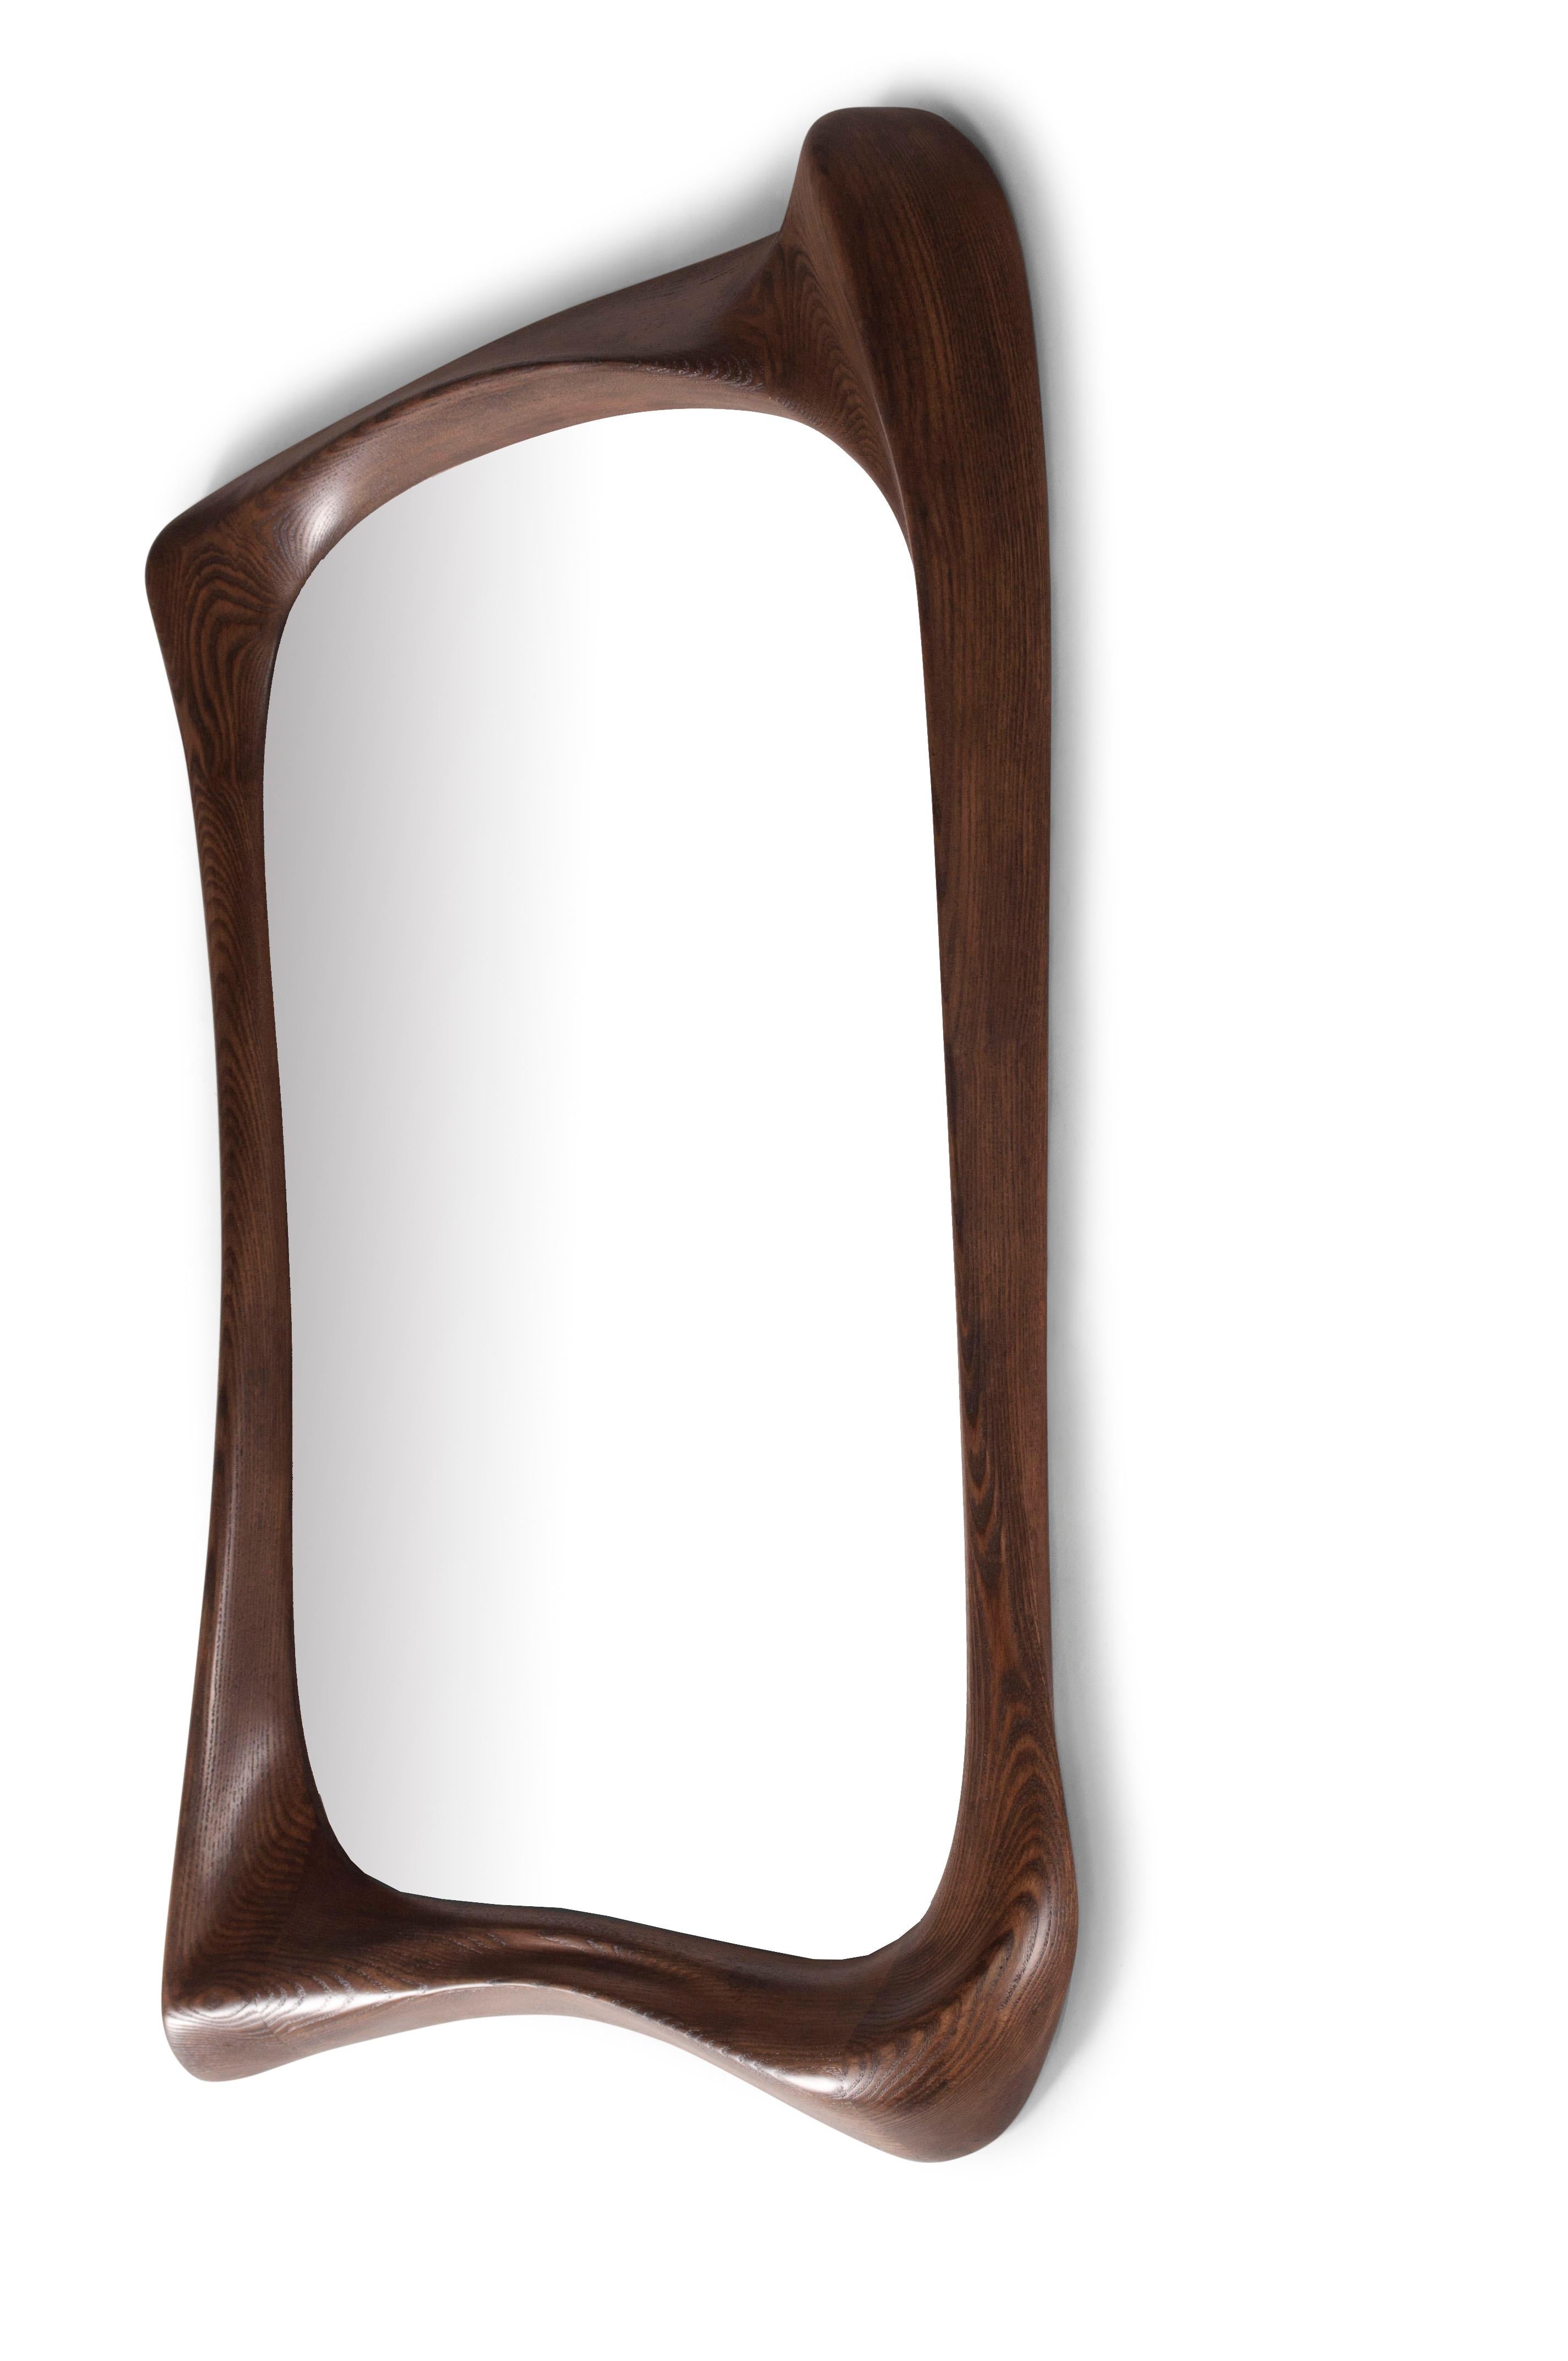 Unique style mirror, Solid wood with graphite walnut stained finish 

About Amorph: 
Amorph is a design and manufacturing company based in Los Angeles, California. We take pride in hand crafted designs connected to technology to create